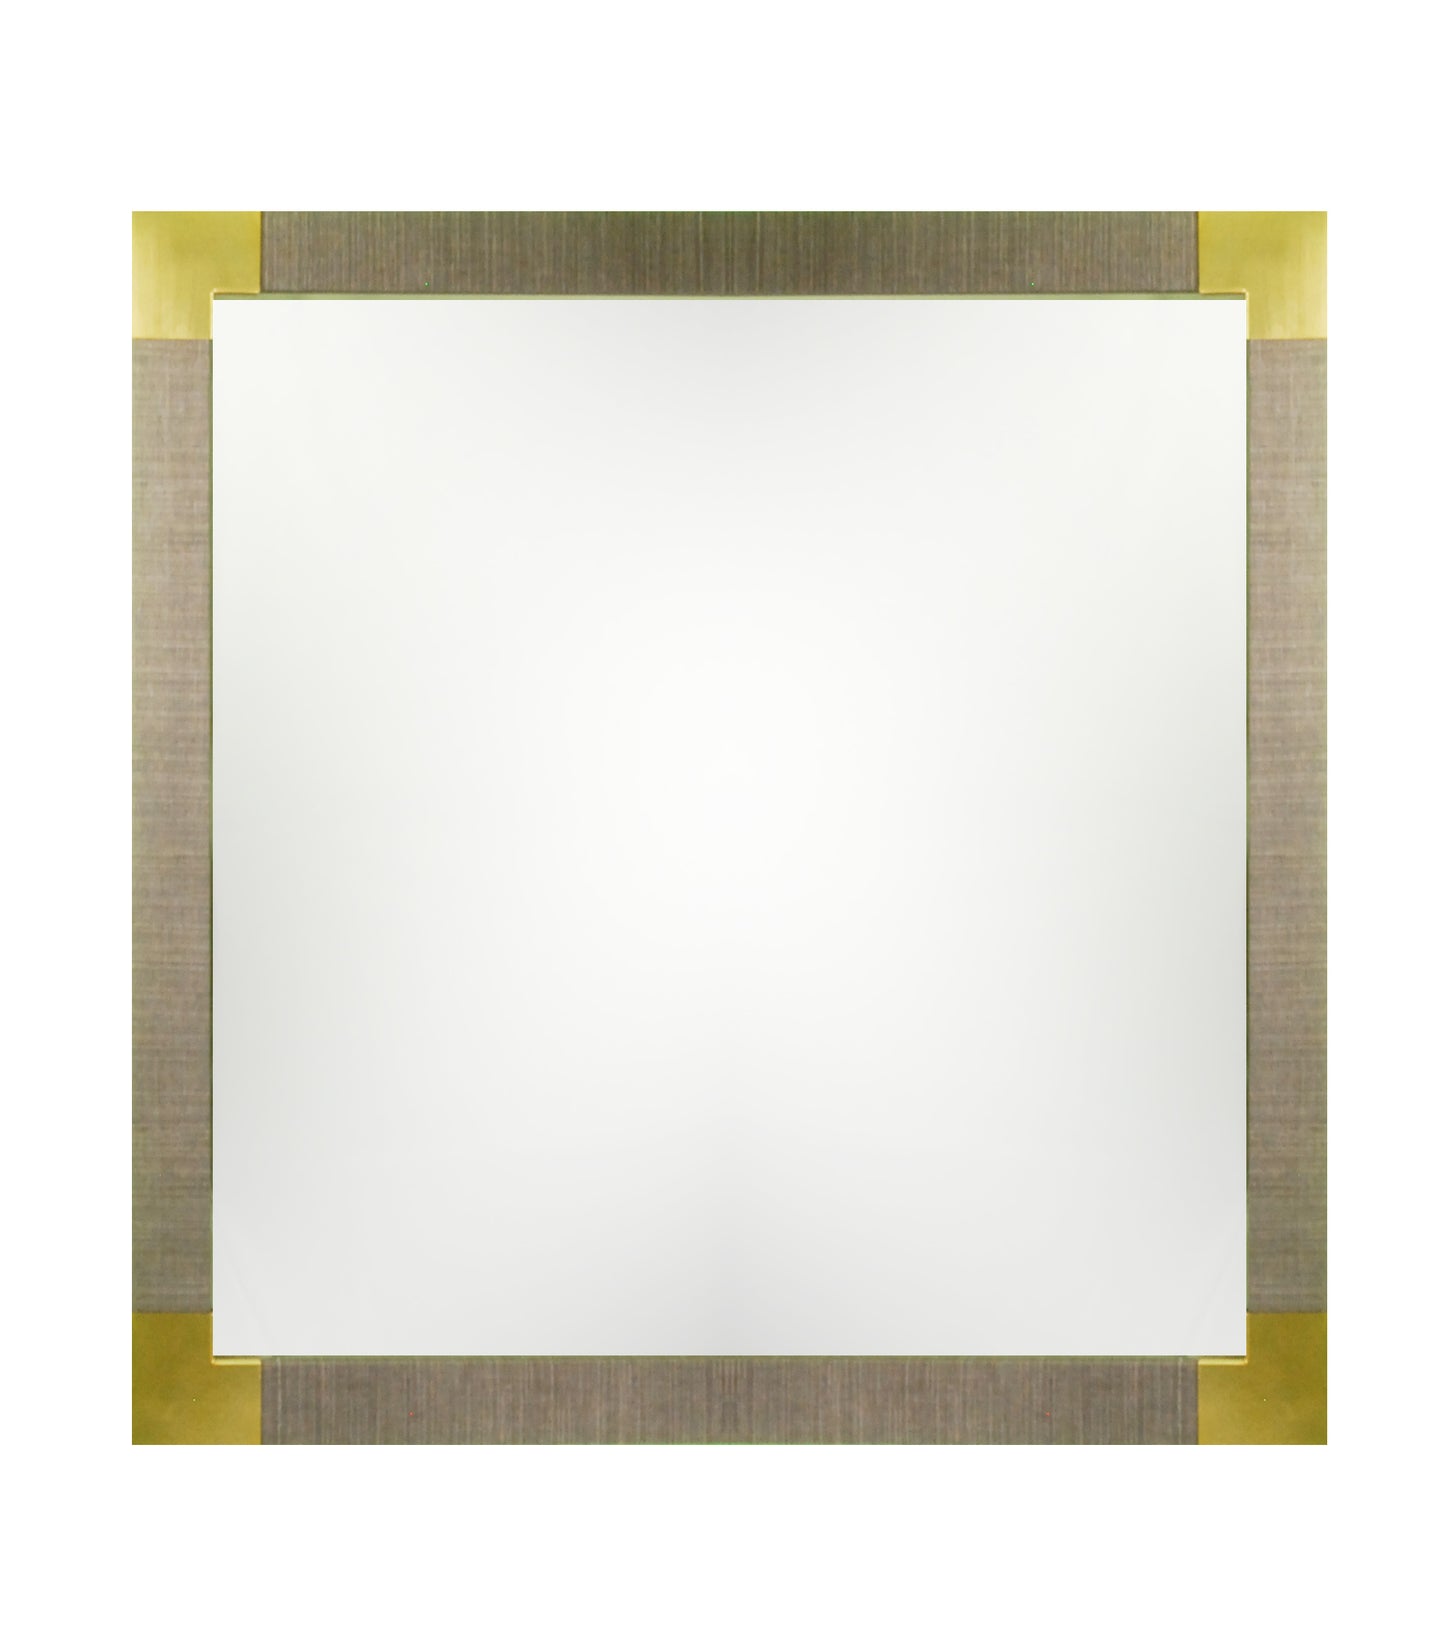 Square mirror frame wrapped in heather grey linen